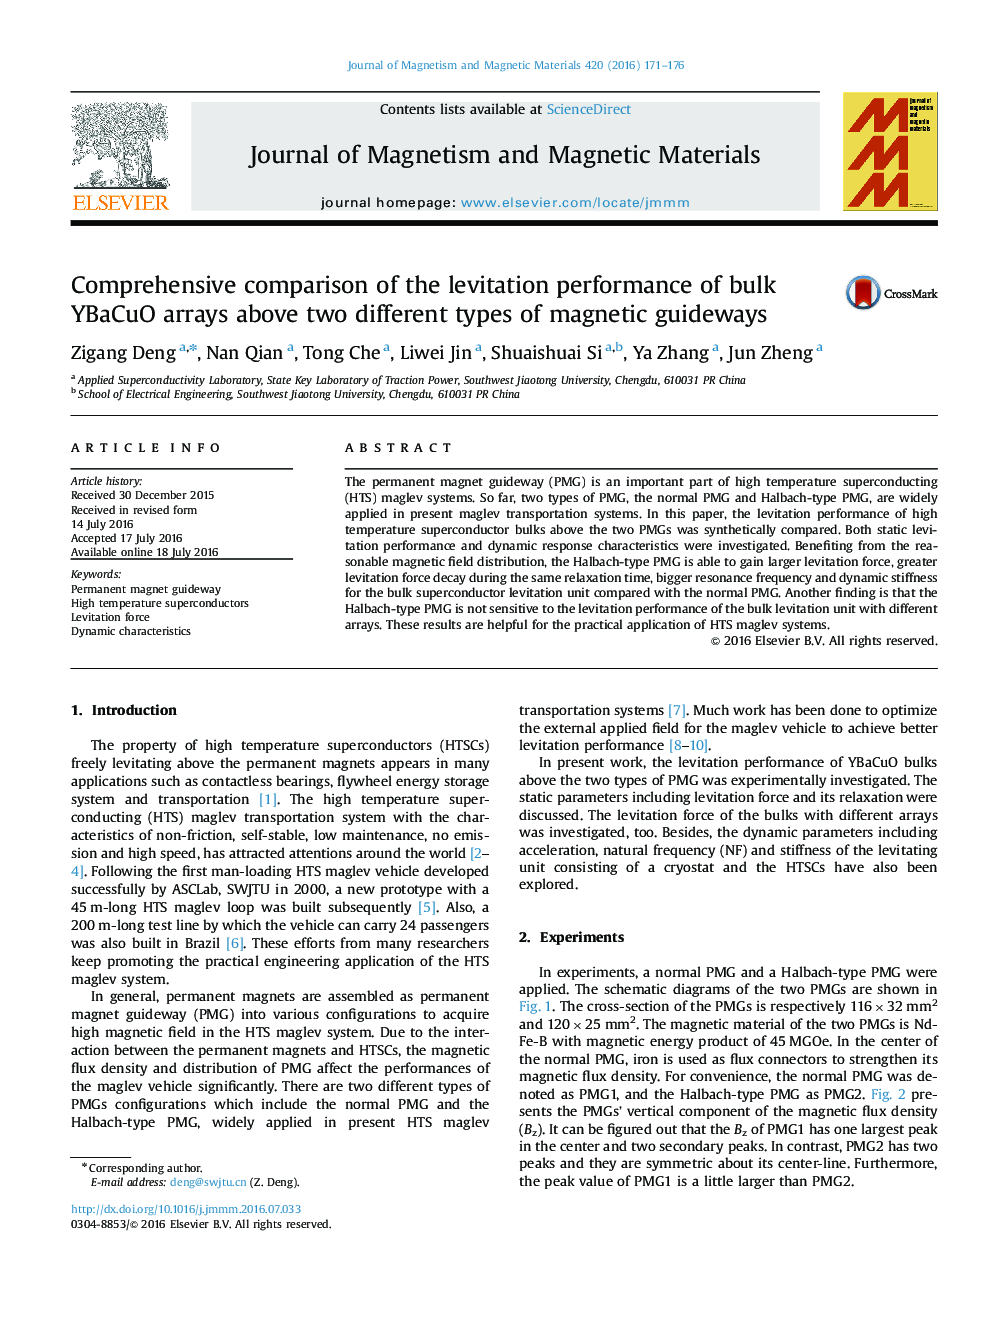 Comprehensive comparison of the levitation performance of bulk YBaCuO arrays above two different types of magnetic guideways